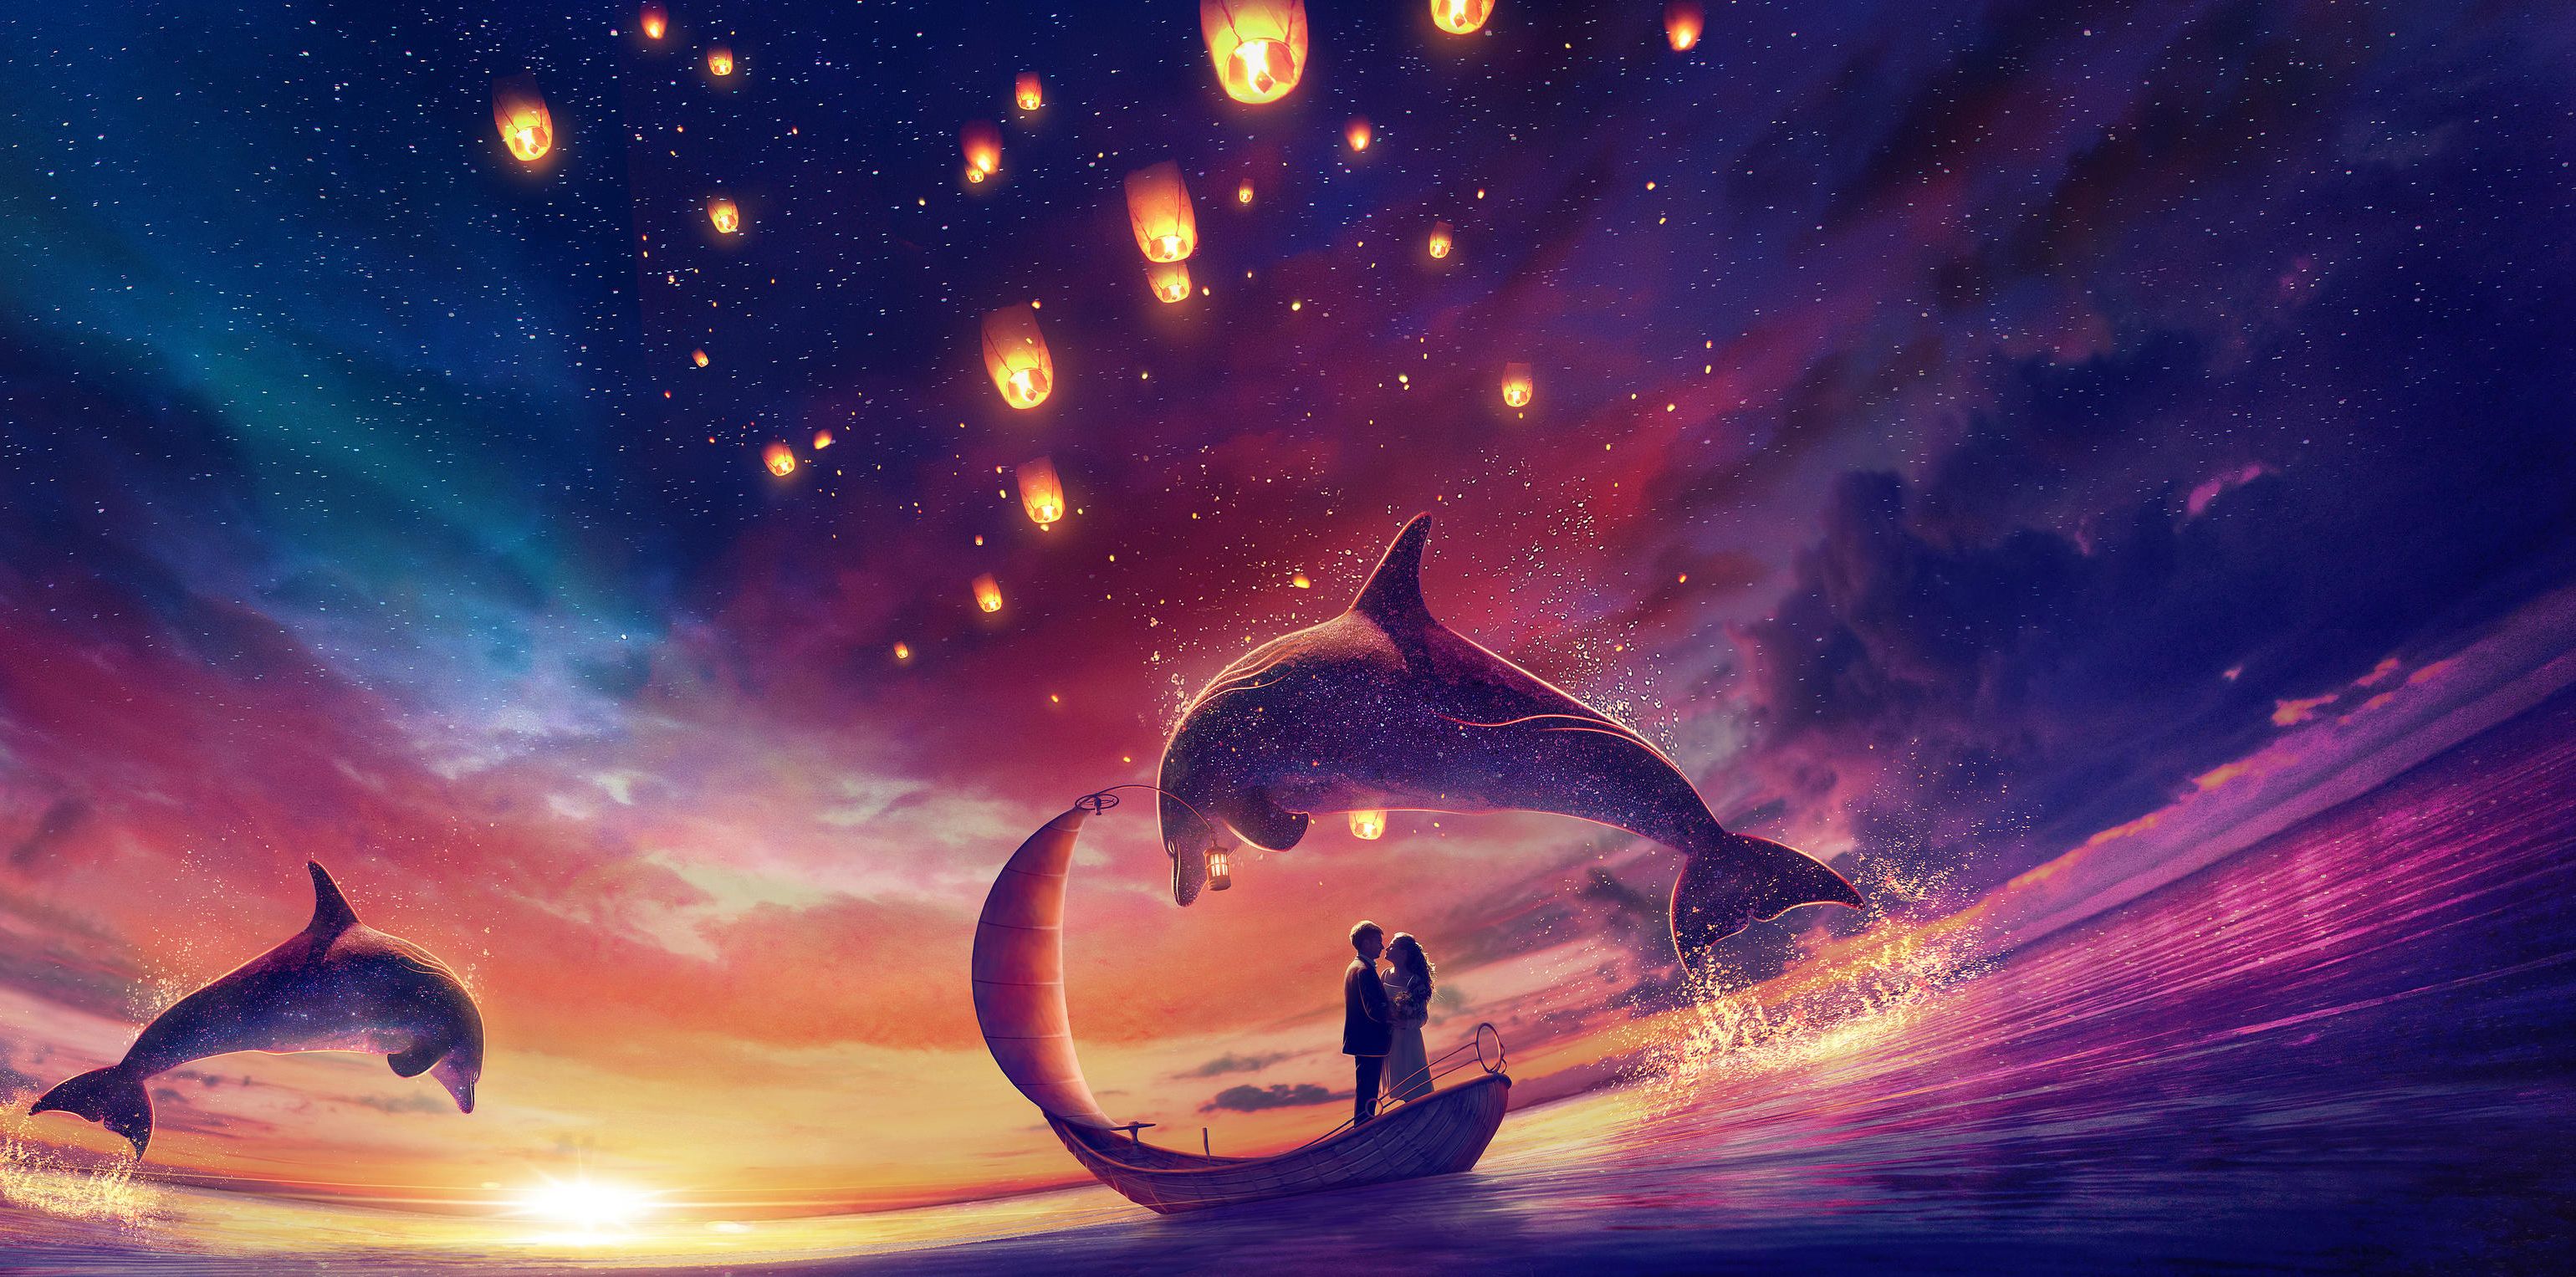 Couple in love on a boat in the water with dolphins wallpaper and image, picture, photo